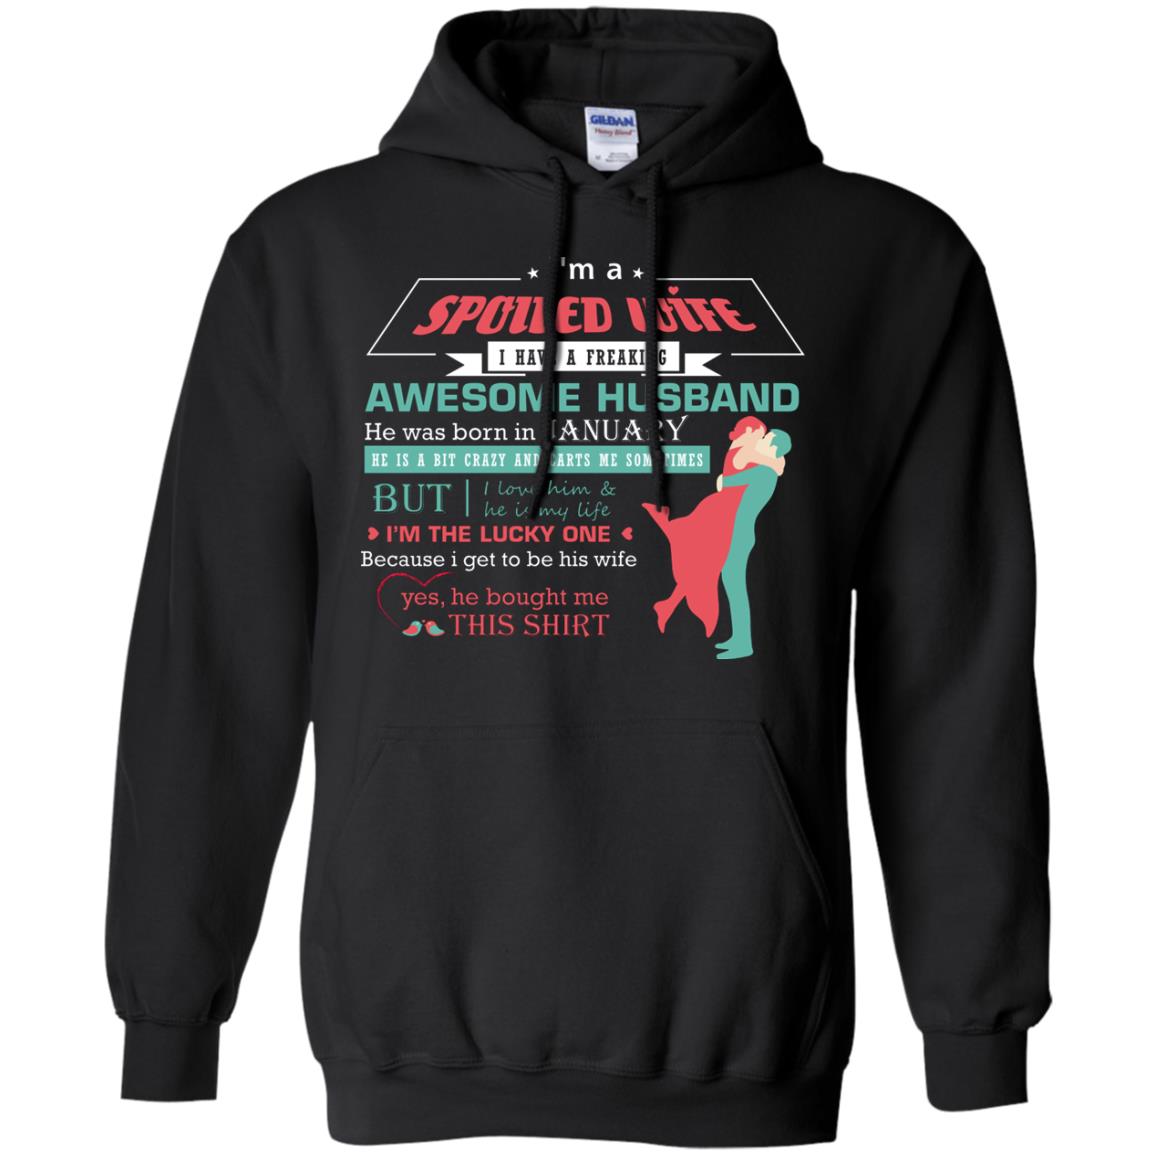 I Am A Spoiled Wife Of A January Husband I Love Him And He Is My Life ShirtG185 Gildan Pullover Hoodie 8 oz.